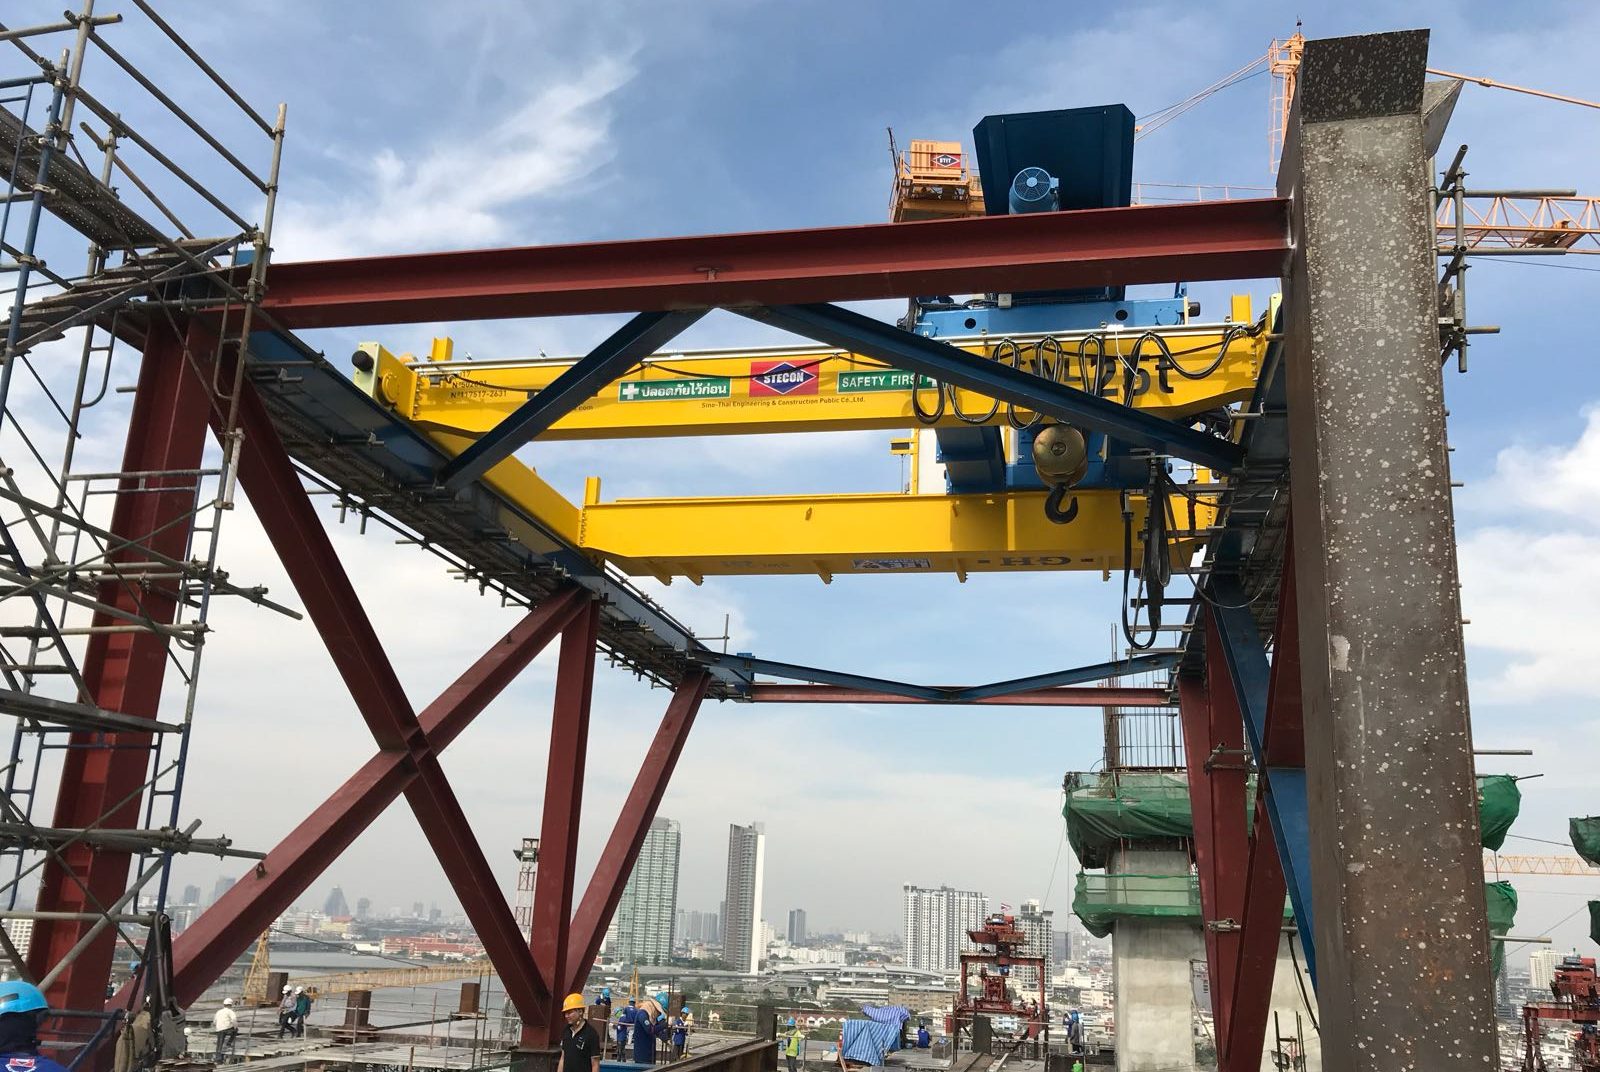 160 tn gantry crane with rotating crab: the market recognizes us. LGH, a new challenge begins in Thailand.